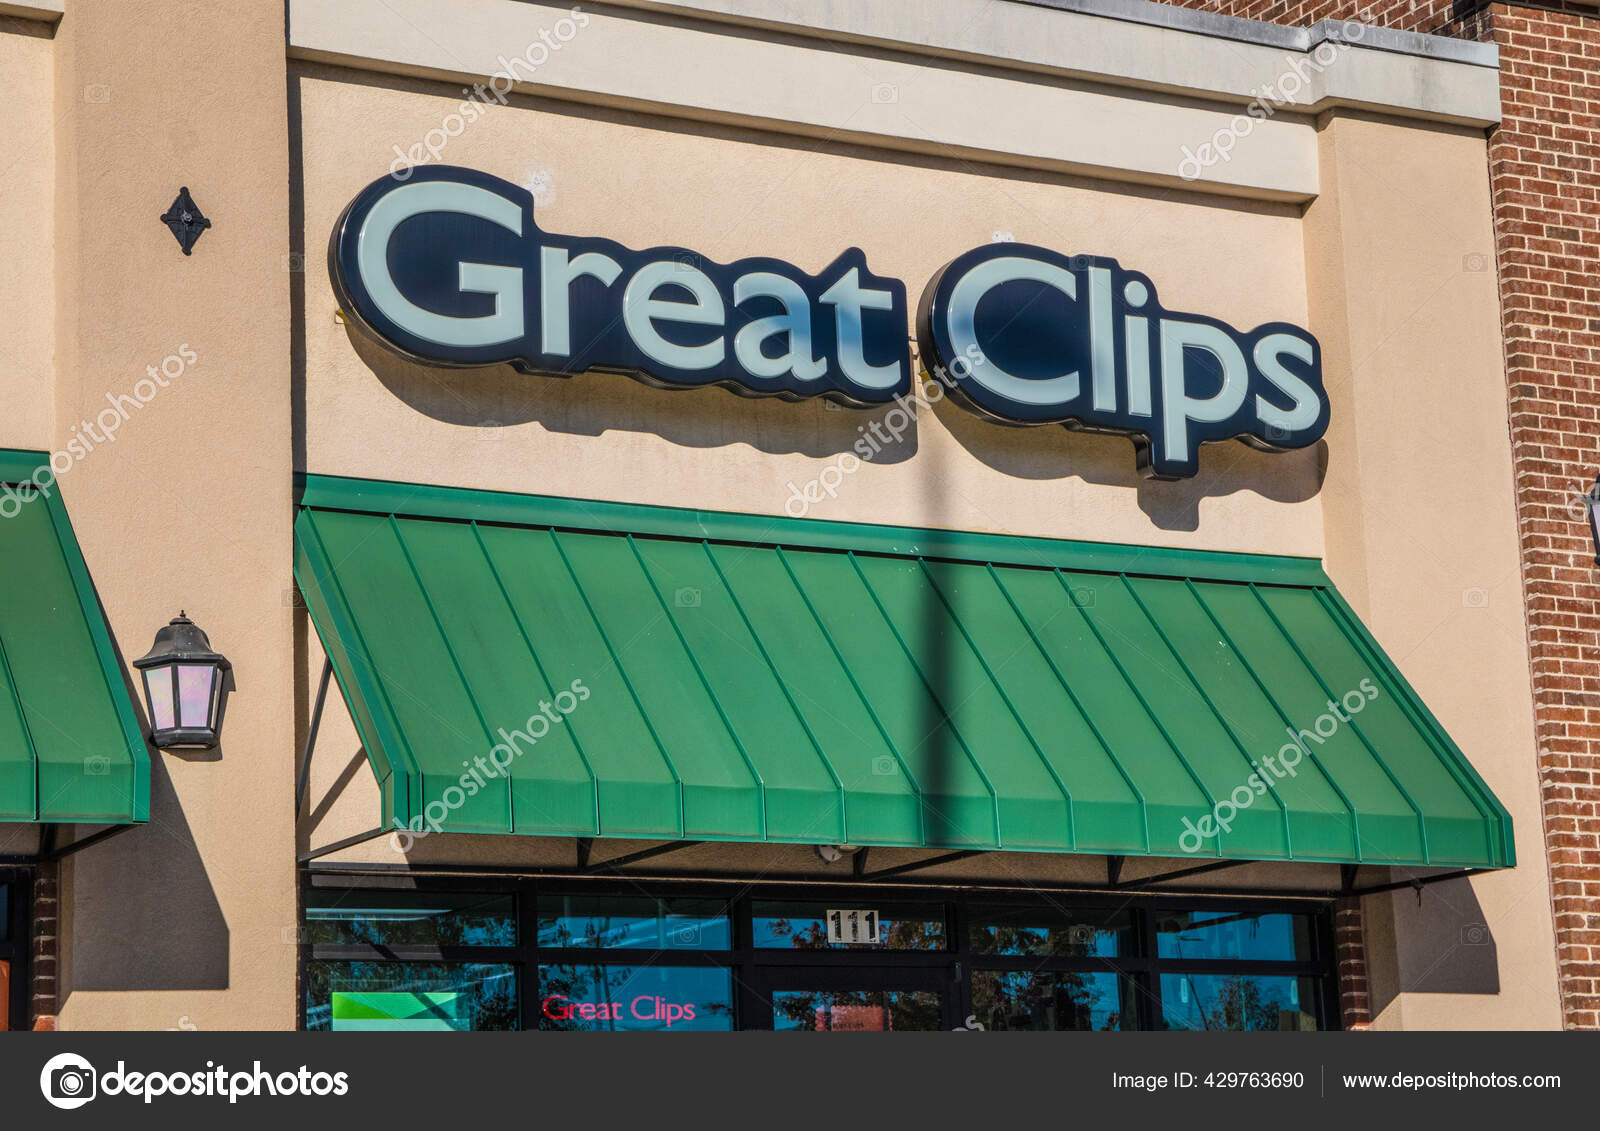 Great Clips - wide 7